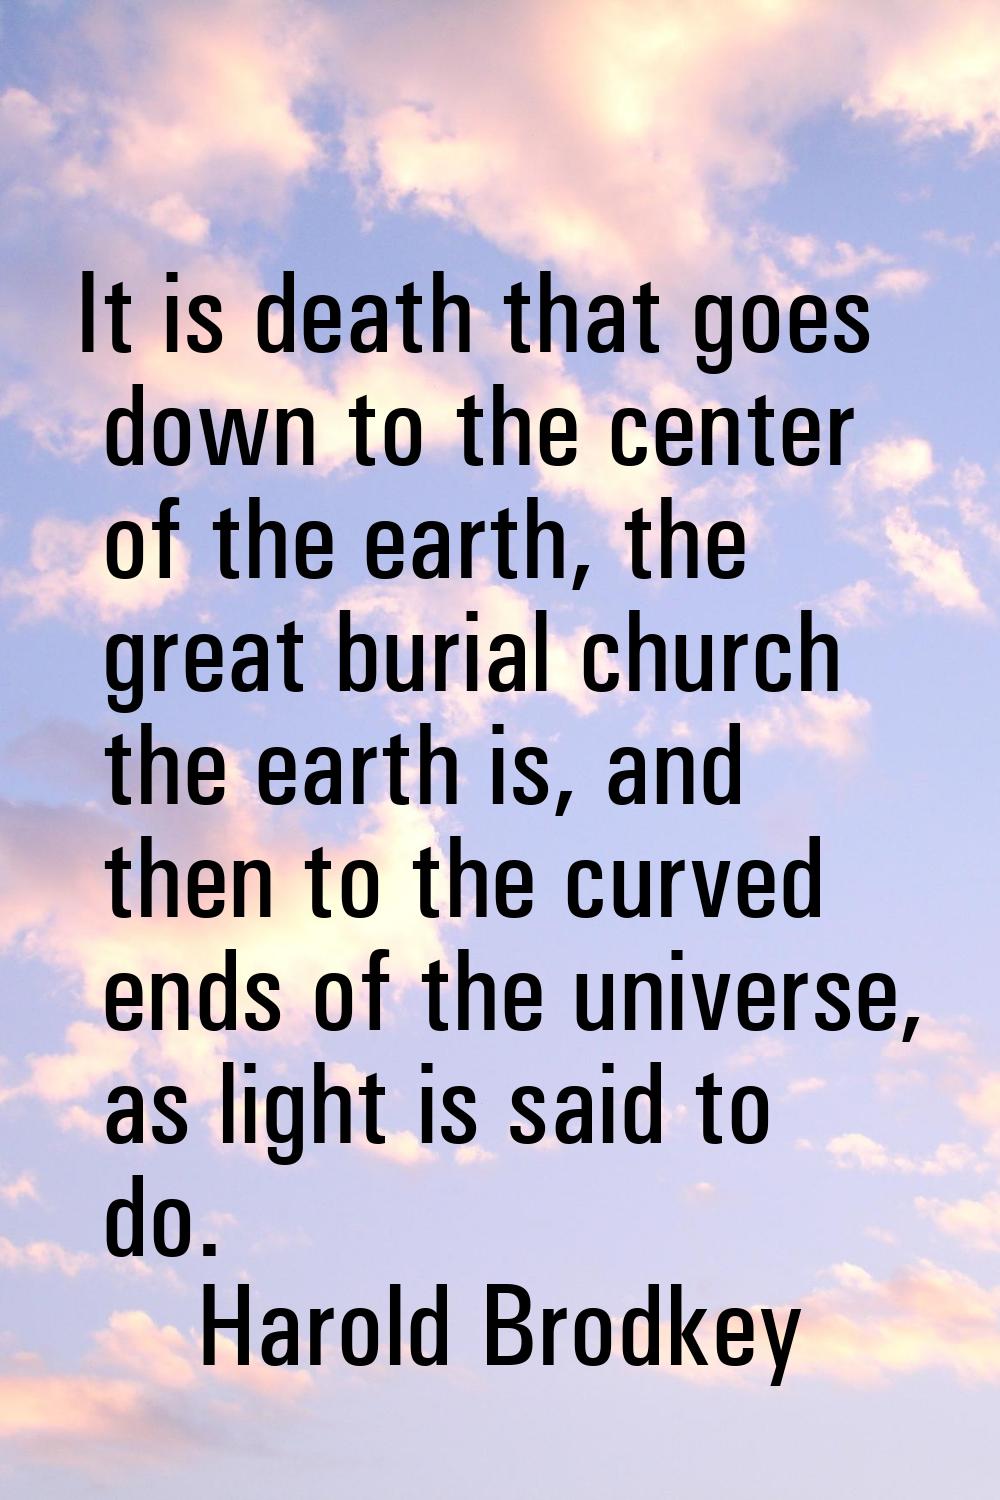 It is death that goes down to the center of the earth, the great burial church the earth is, and th